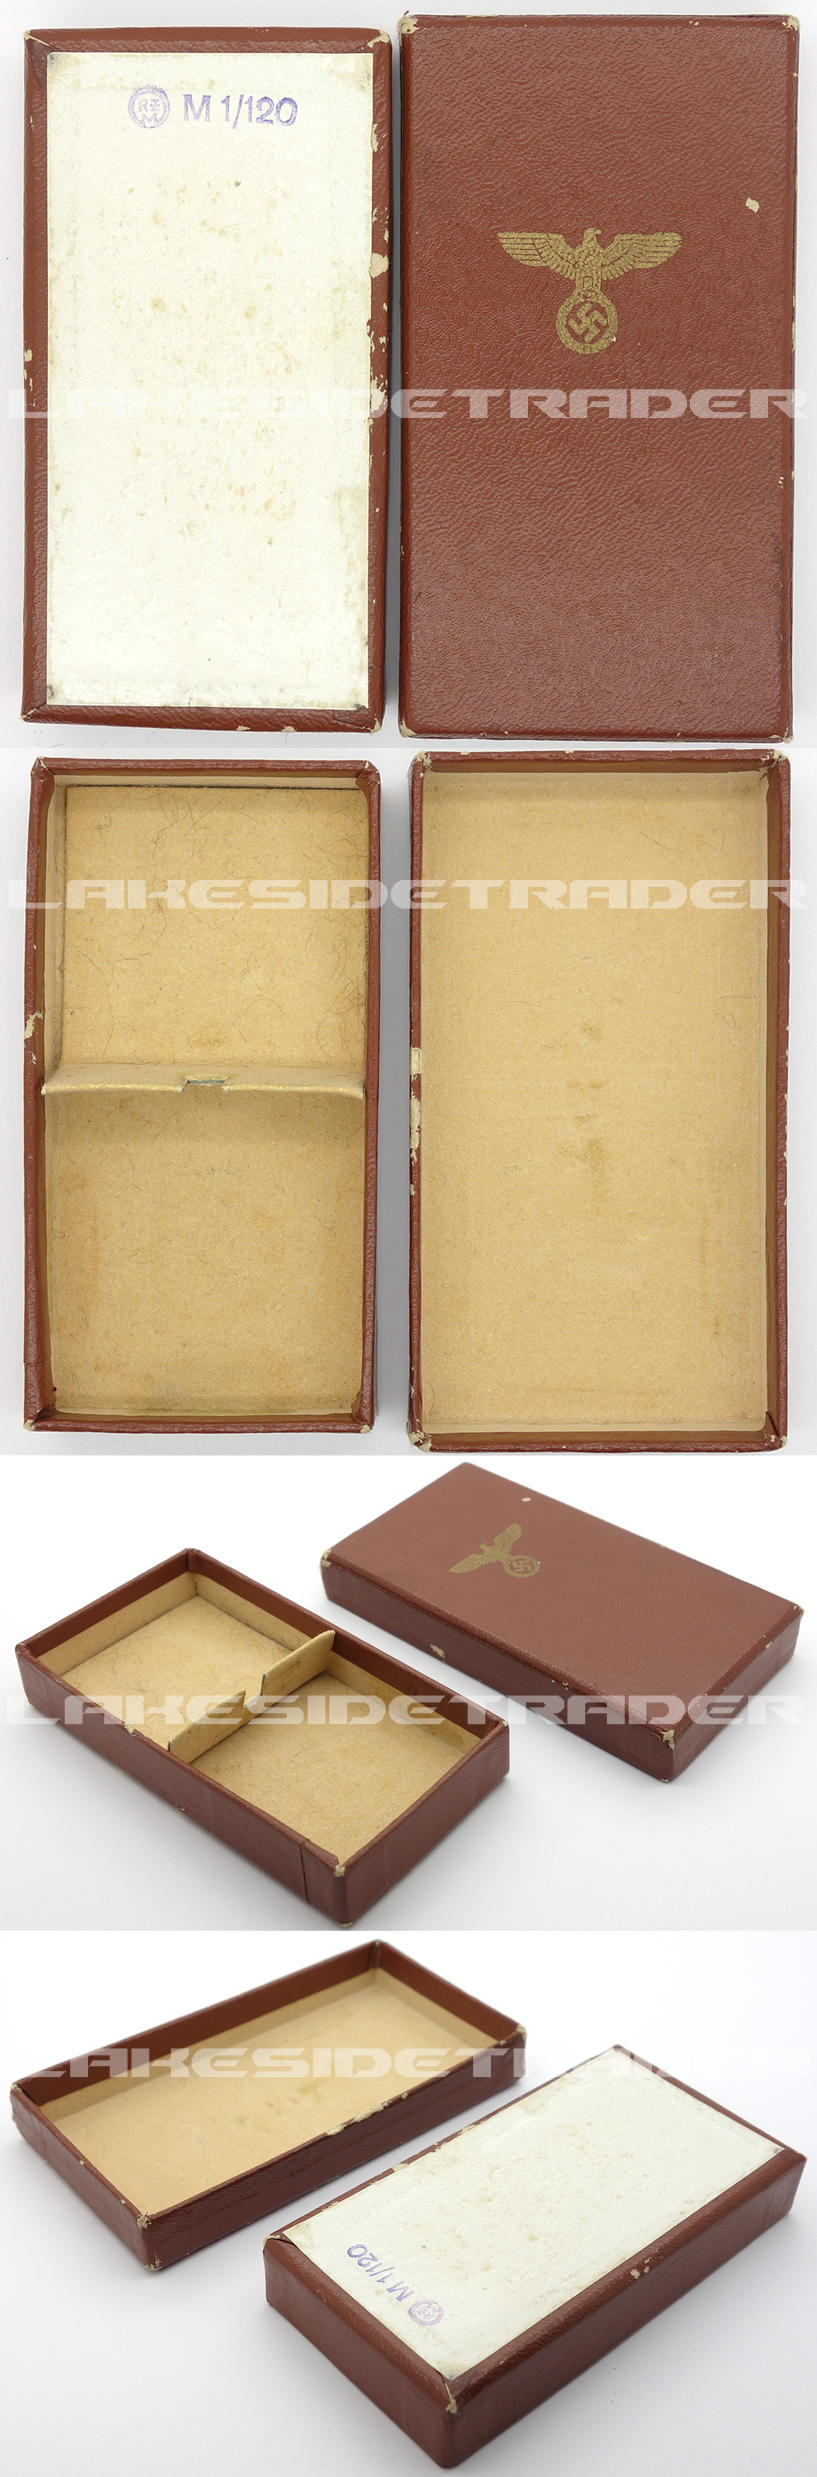 Case for a NSDAP 10yr Service Award by RZM M1/120